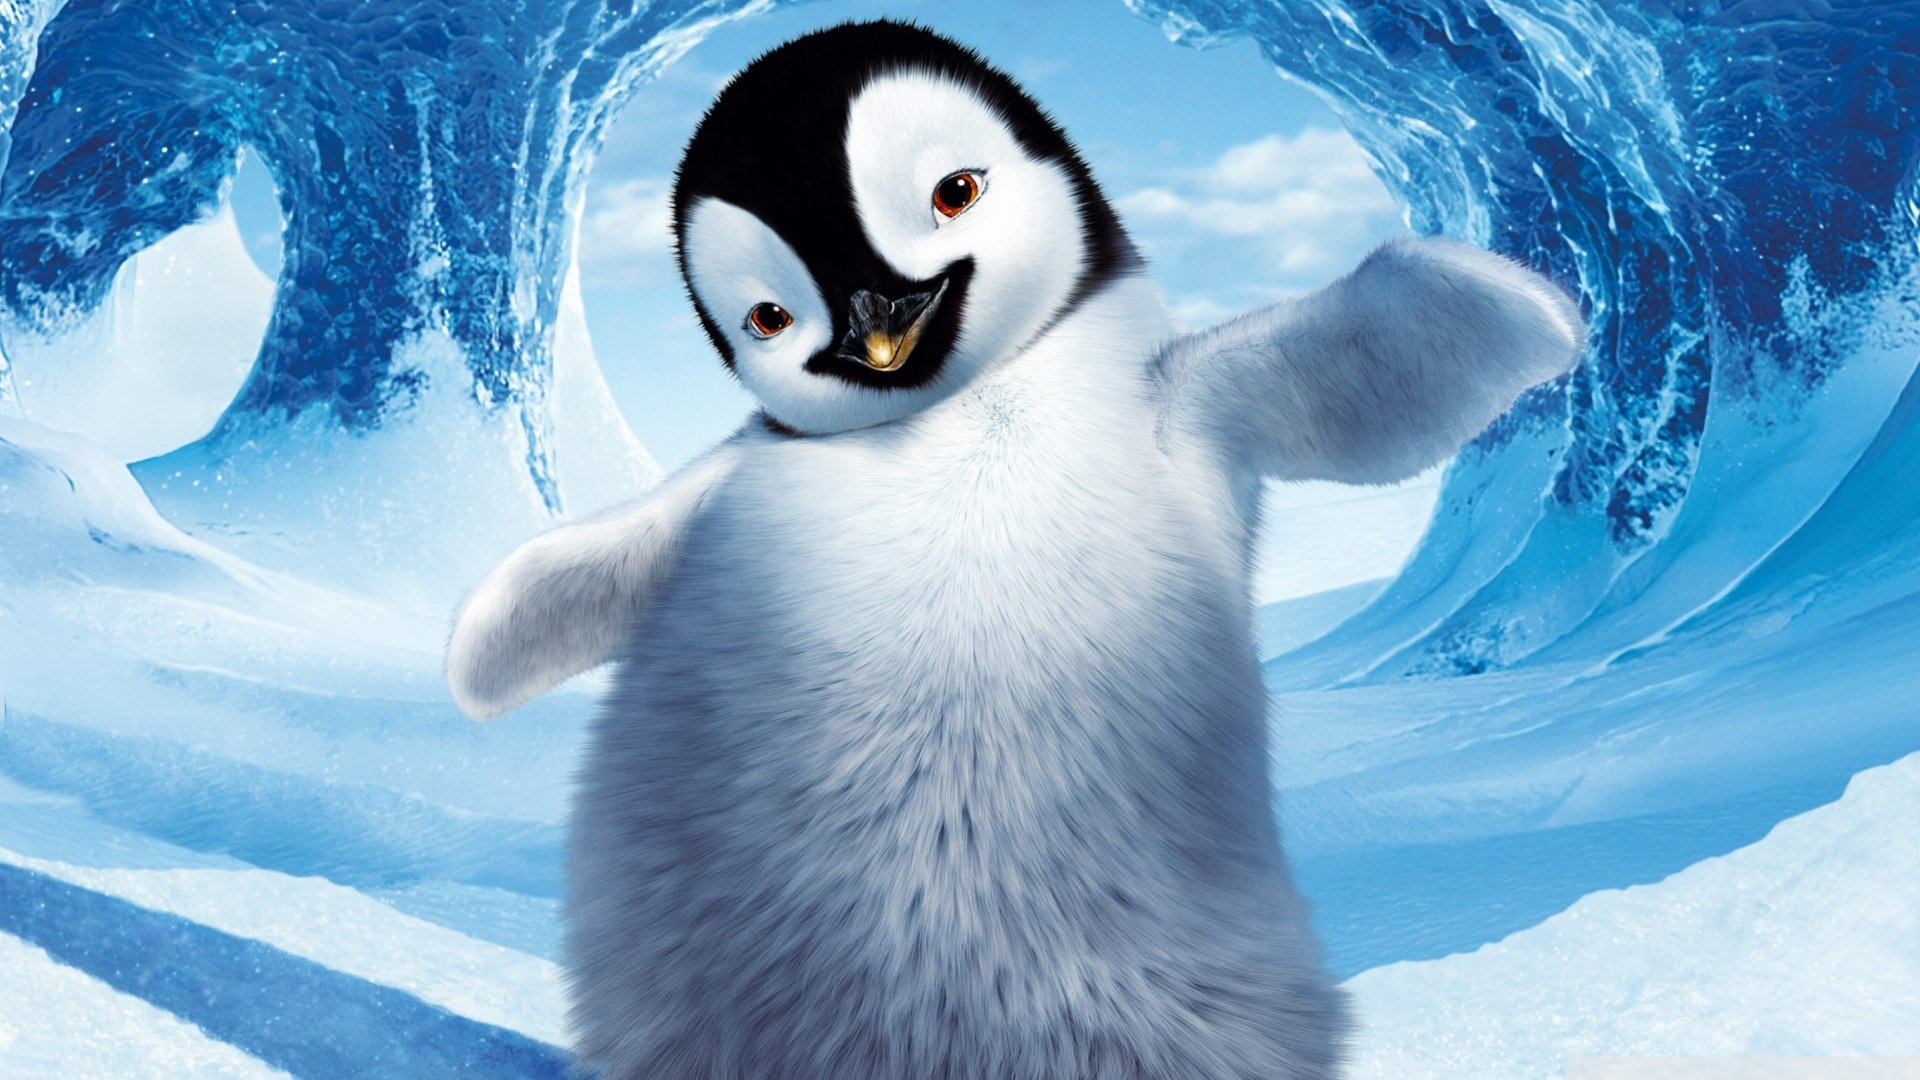 Happy Feet 2 Movie Wallpapers HD Wallpapers 1920x1080